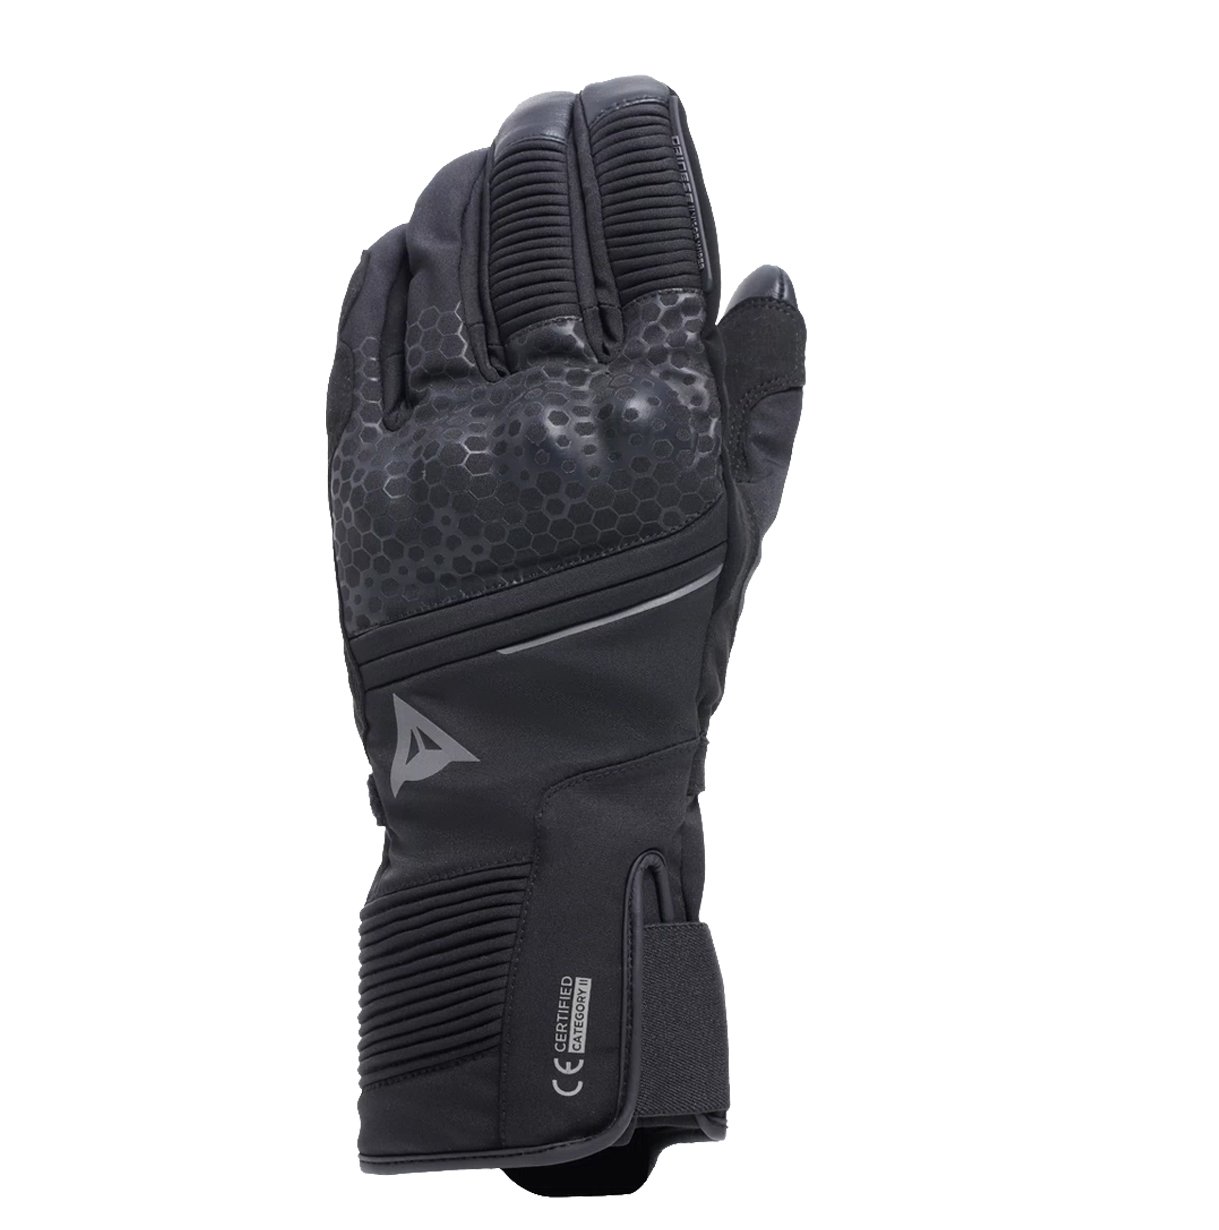 Image of Dainese Tempest 2 D-Dry Long Thermal Schwarz Handschuhe Größe S